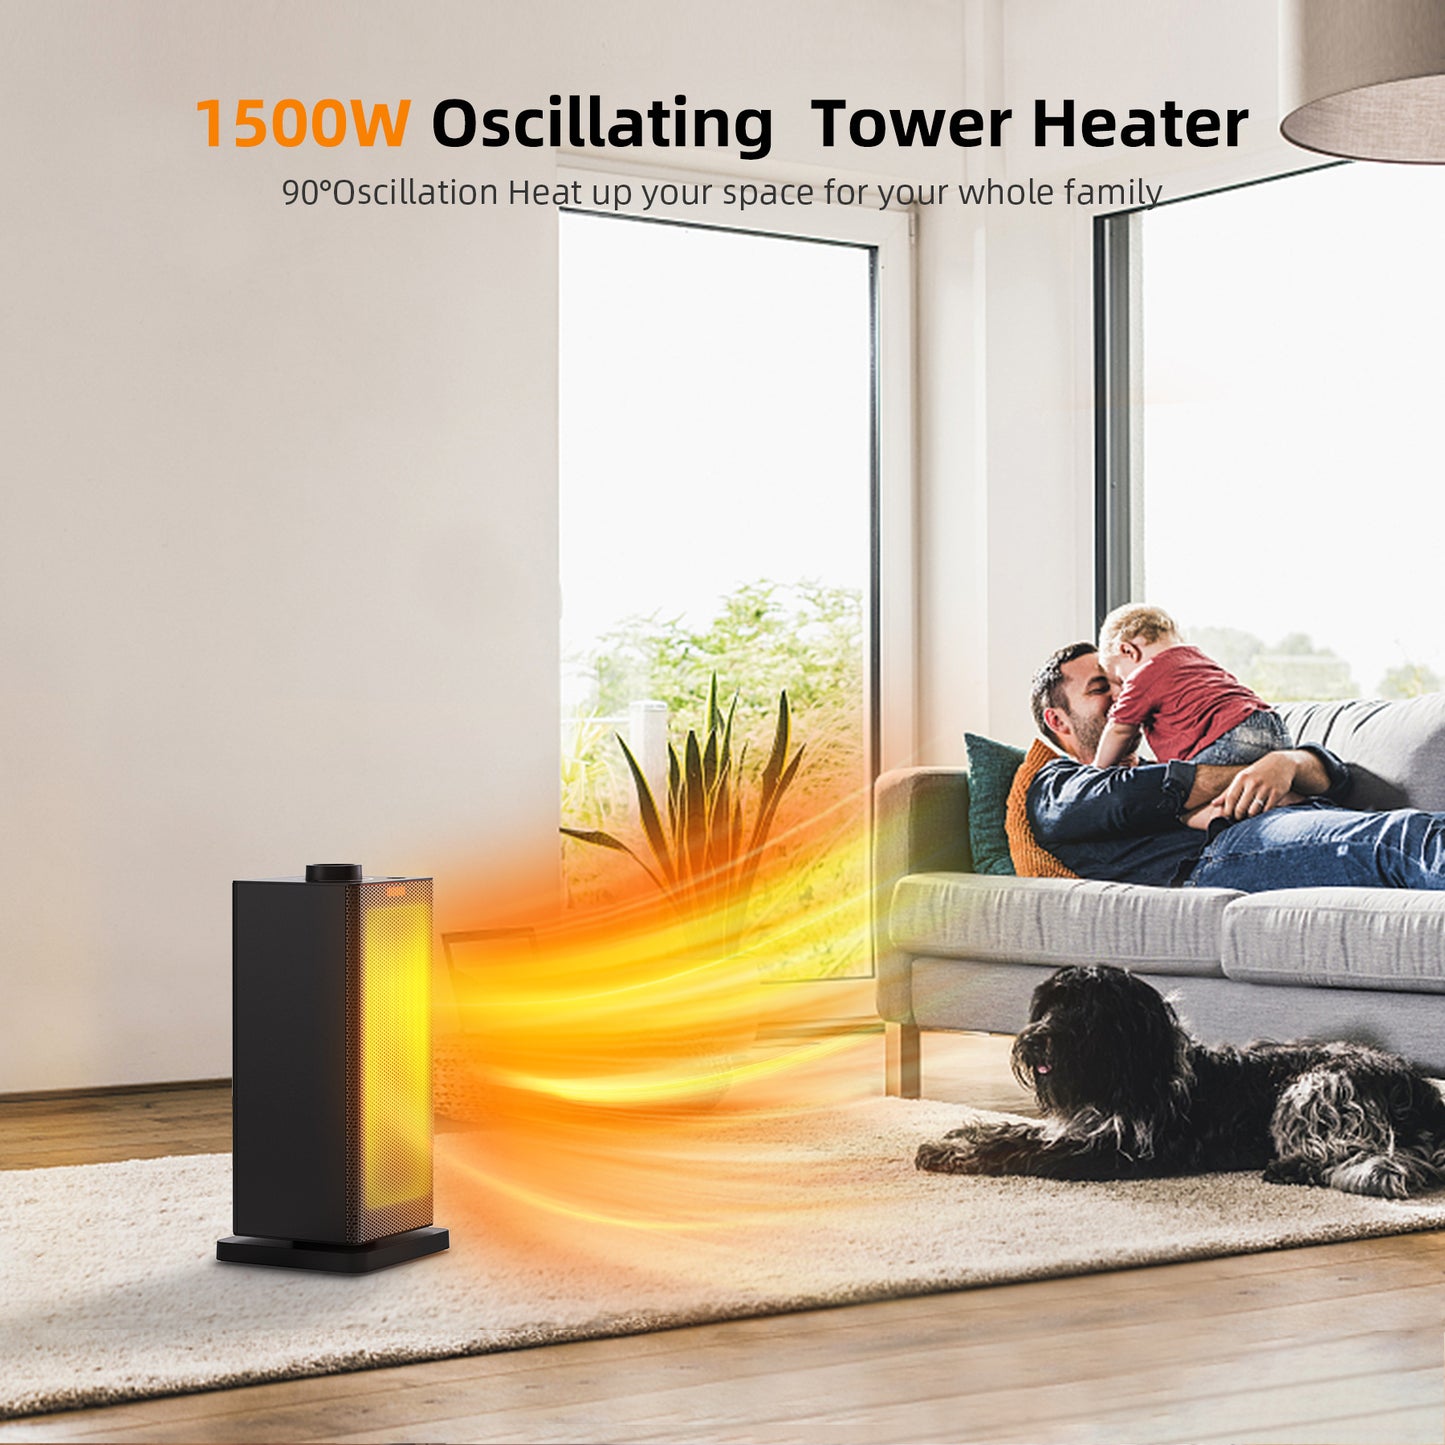 Alrocket 1500W Ceramic Space Heater - Features Built-in Timer and Oscillation Black